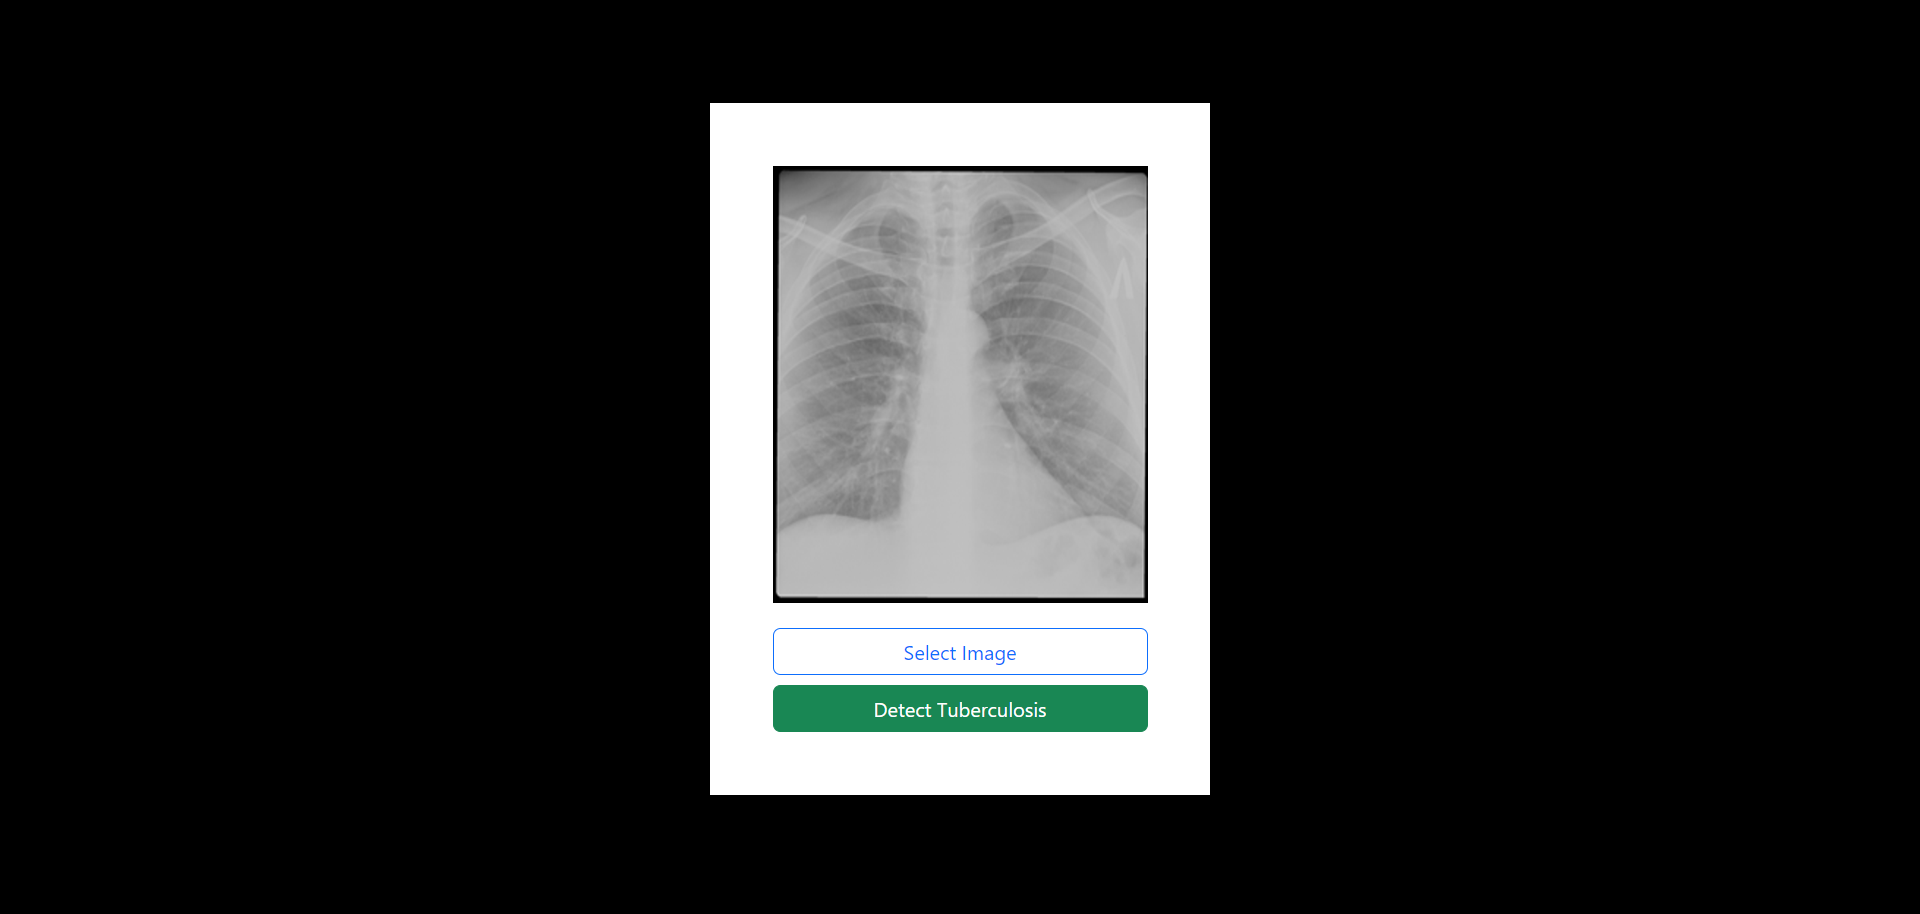 Chest X-Ray Tuberculosis Detector user interface